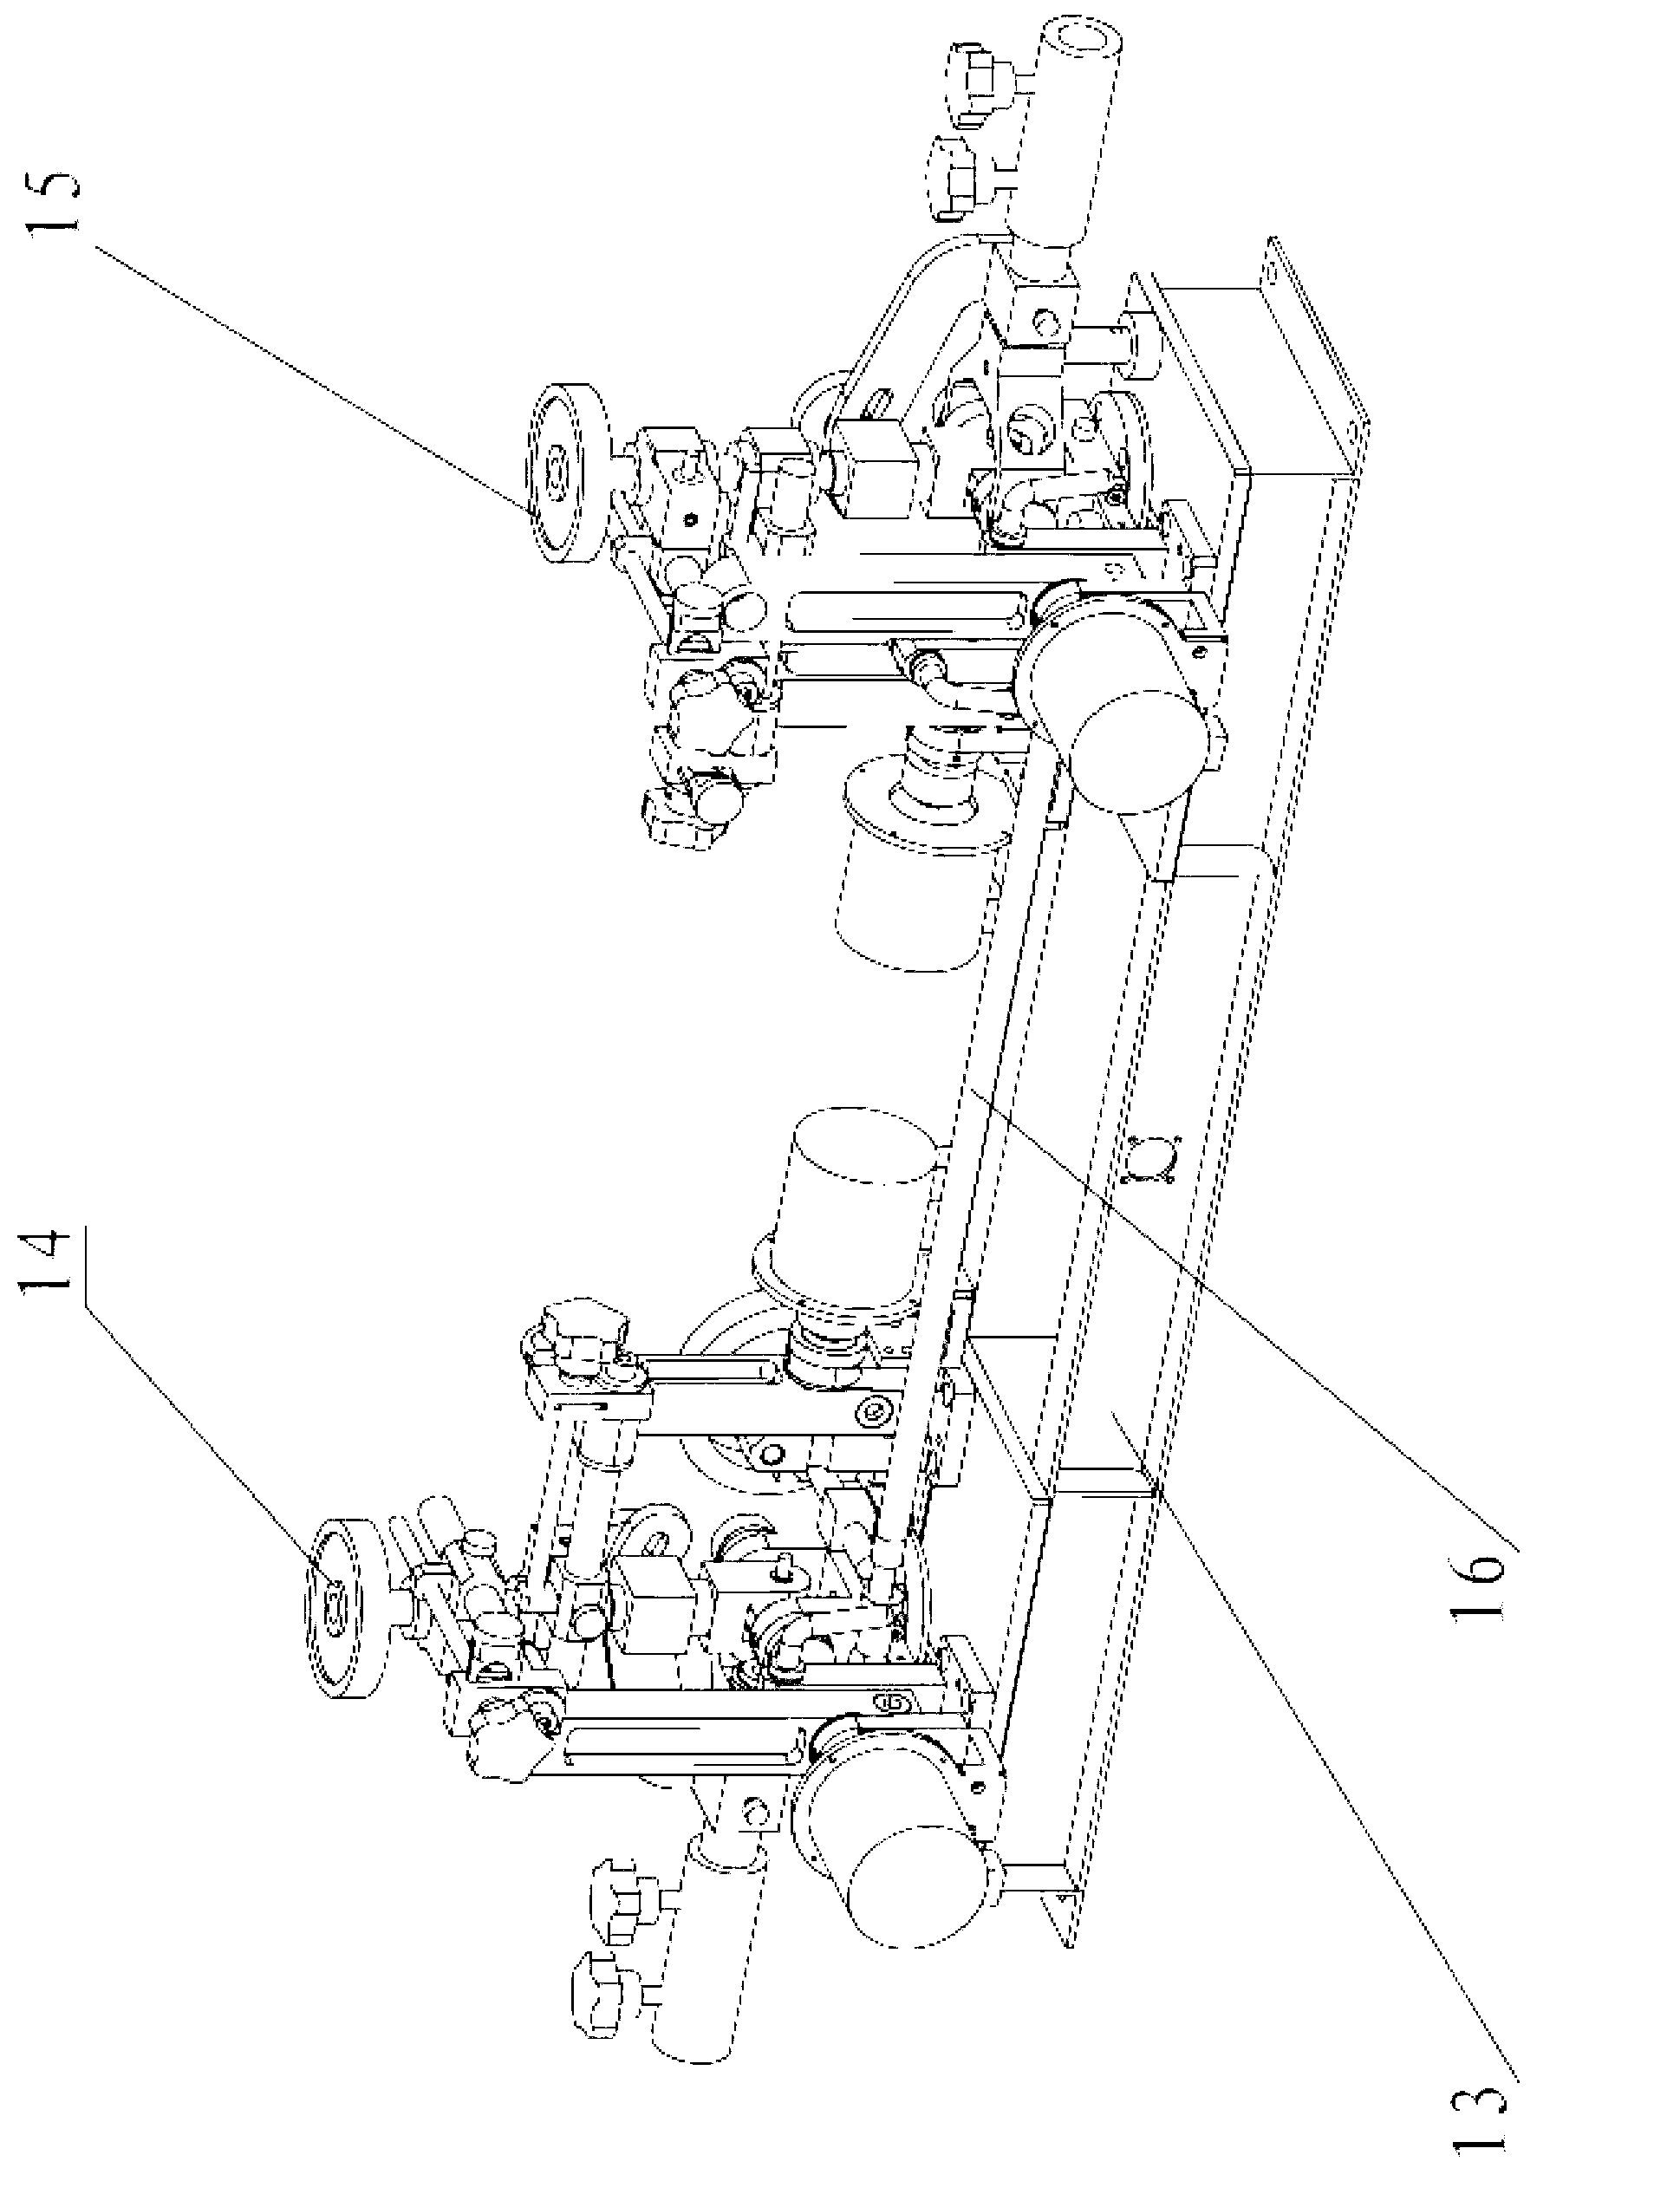 Split assembly and disassembly type device for measuring automobile four-wheel aligner